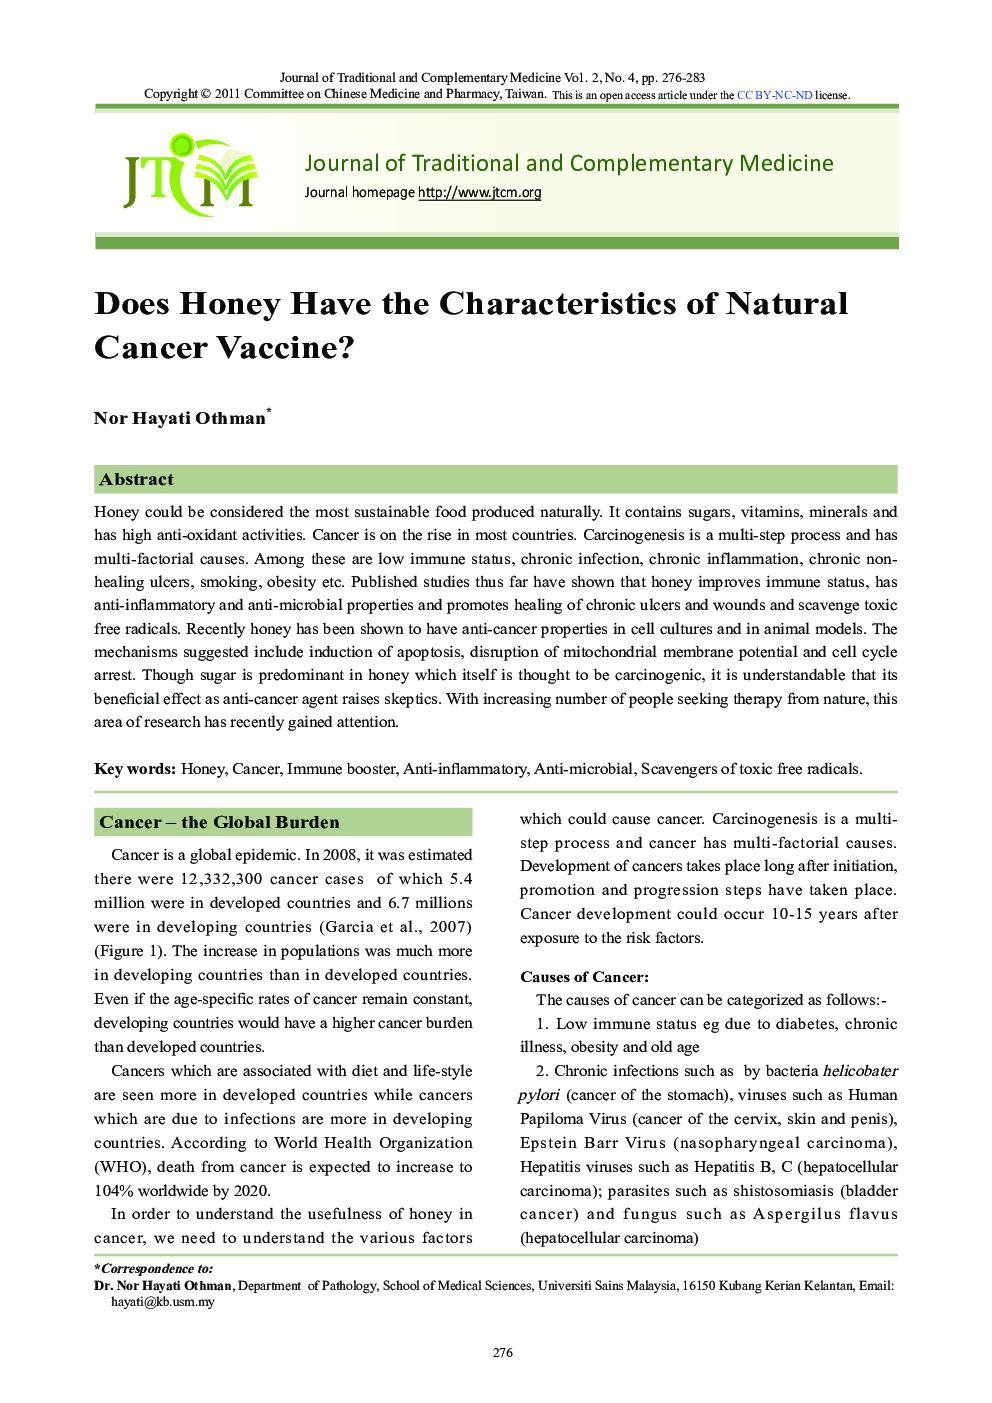 Does Honey Have the Characteristics of Natural Cancer Vaccine?